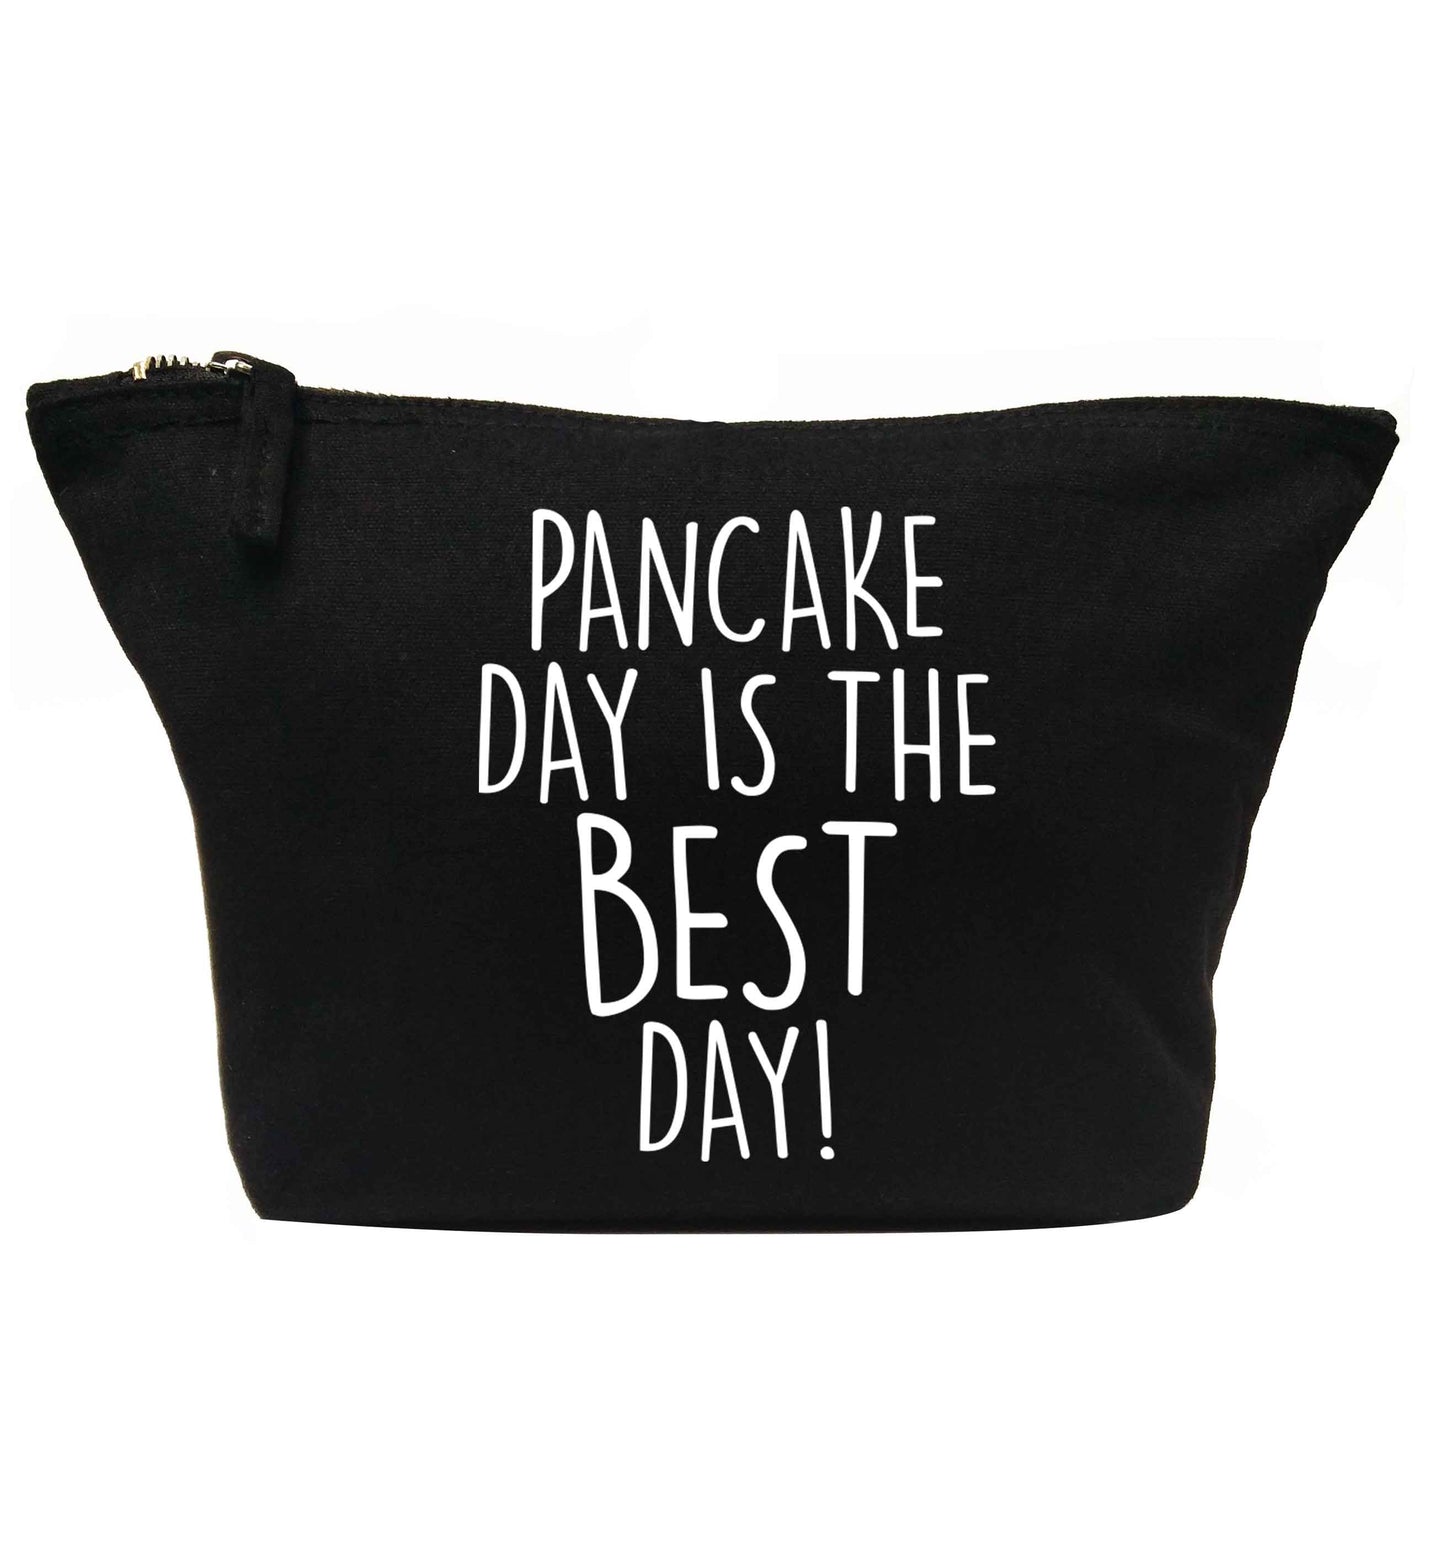 Pancake day is the best day | Makeup / wash bag